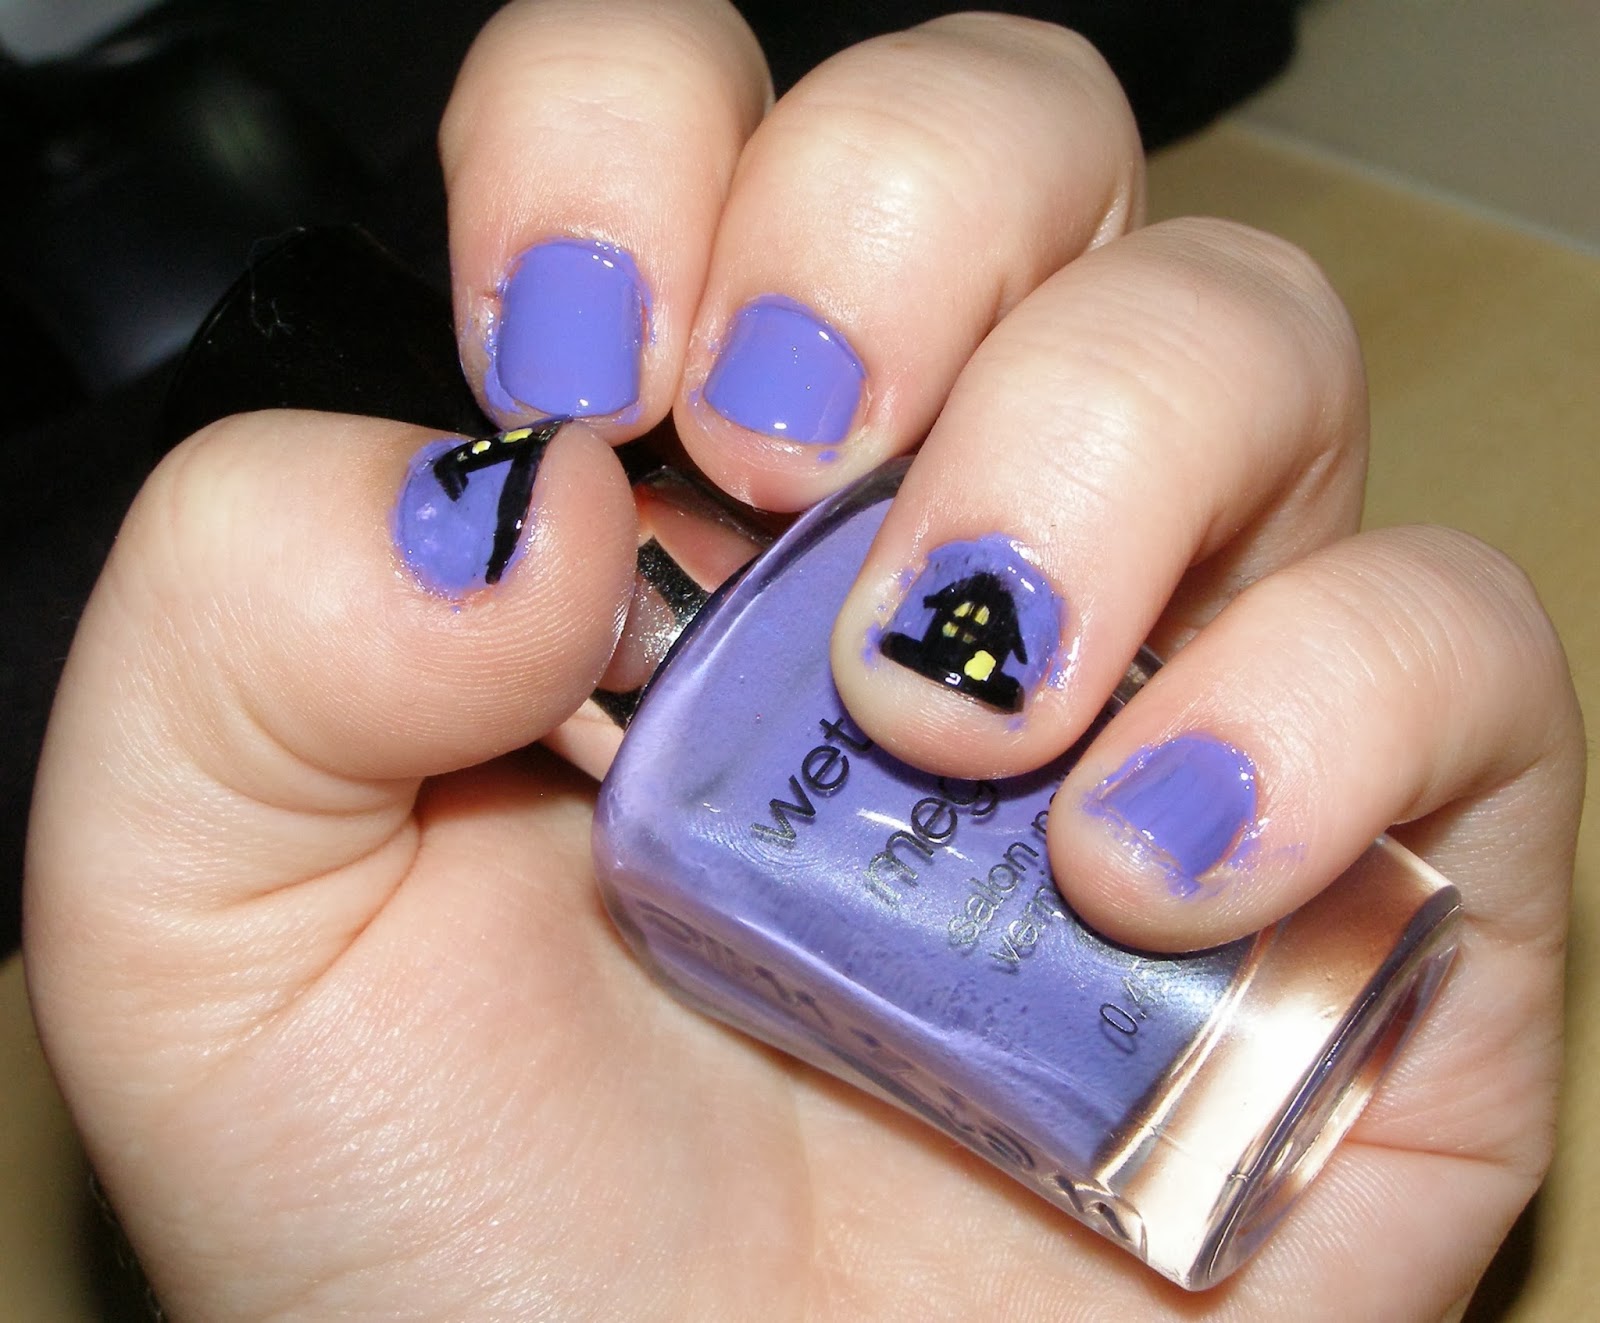 8. Haunted House Nail Art Ideas - wide 4